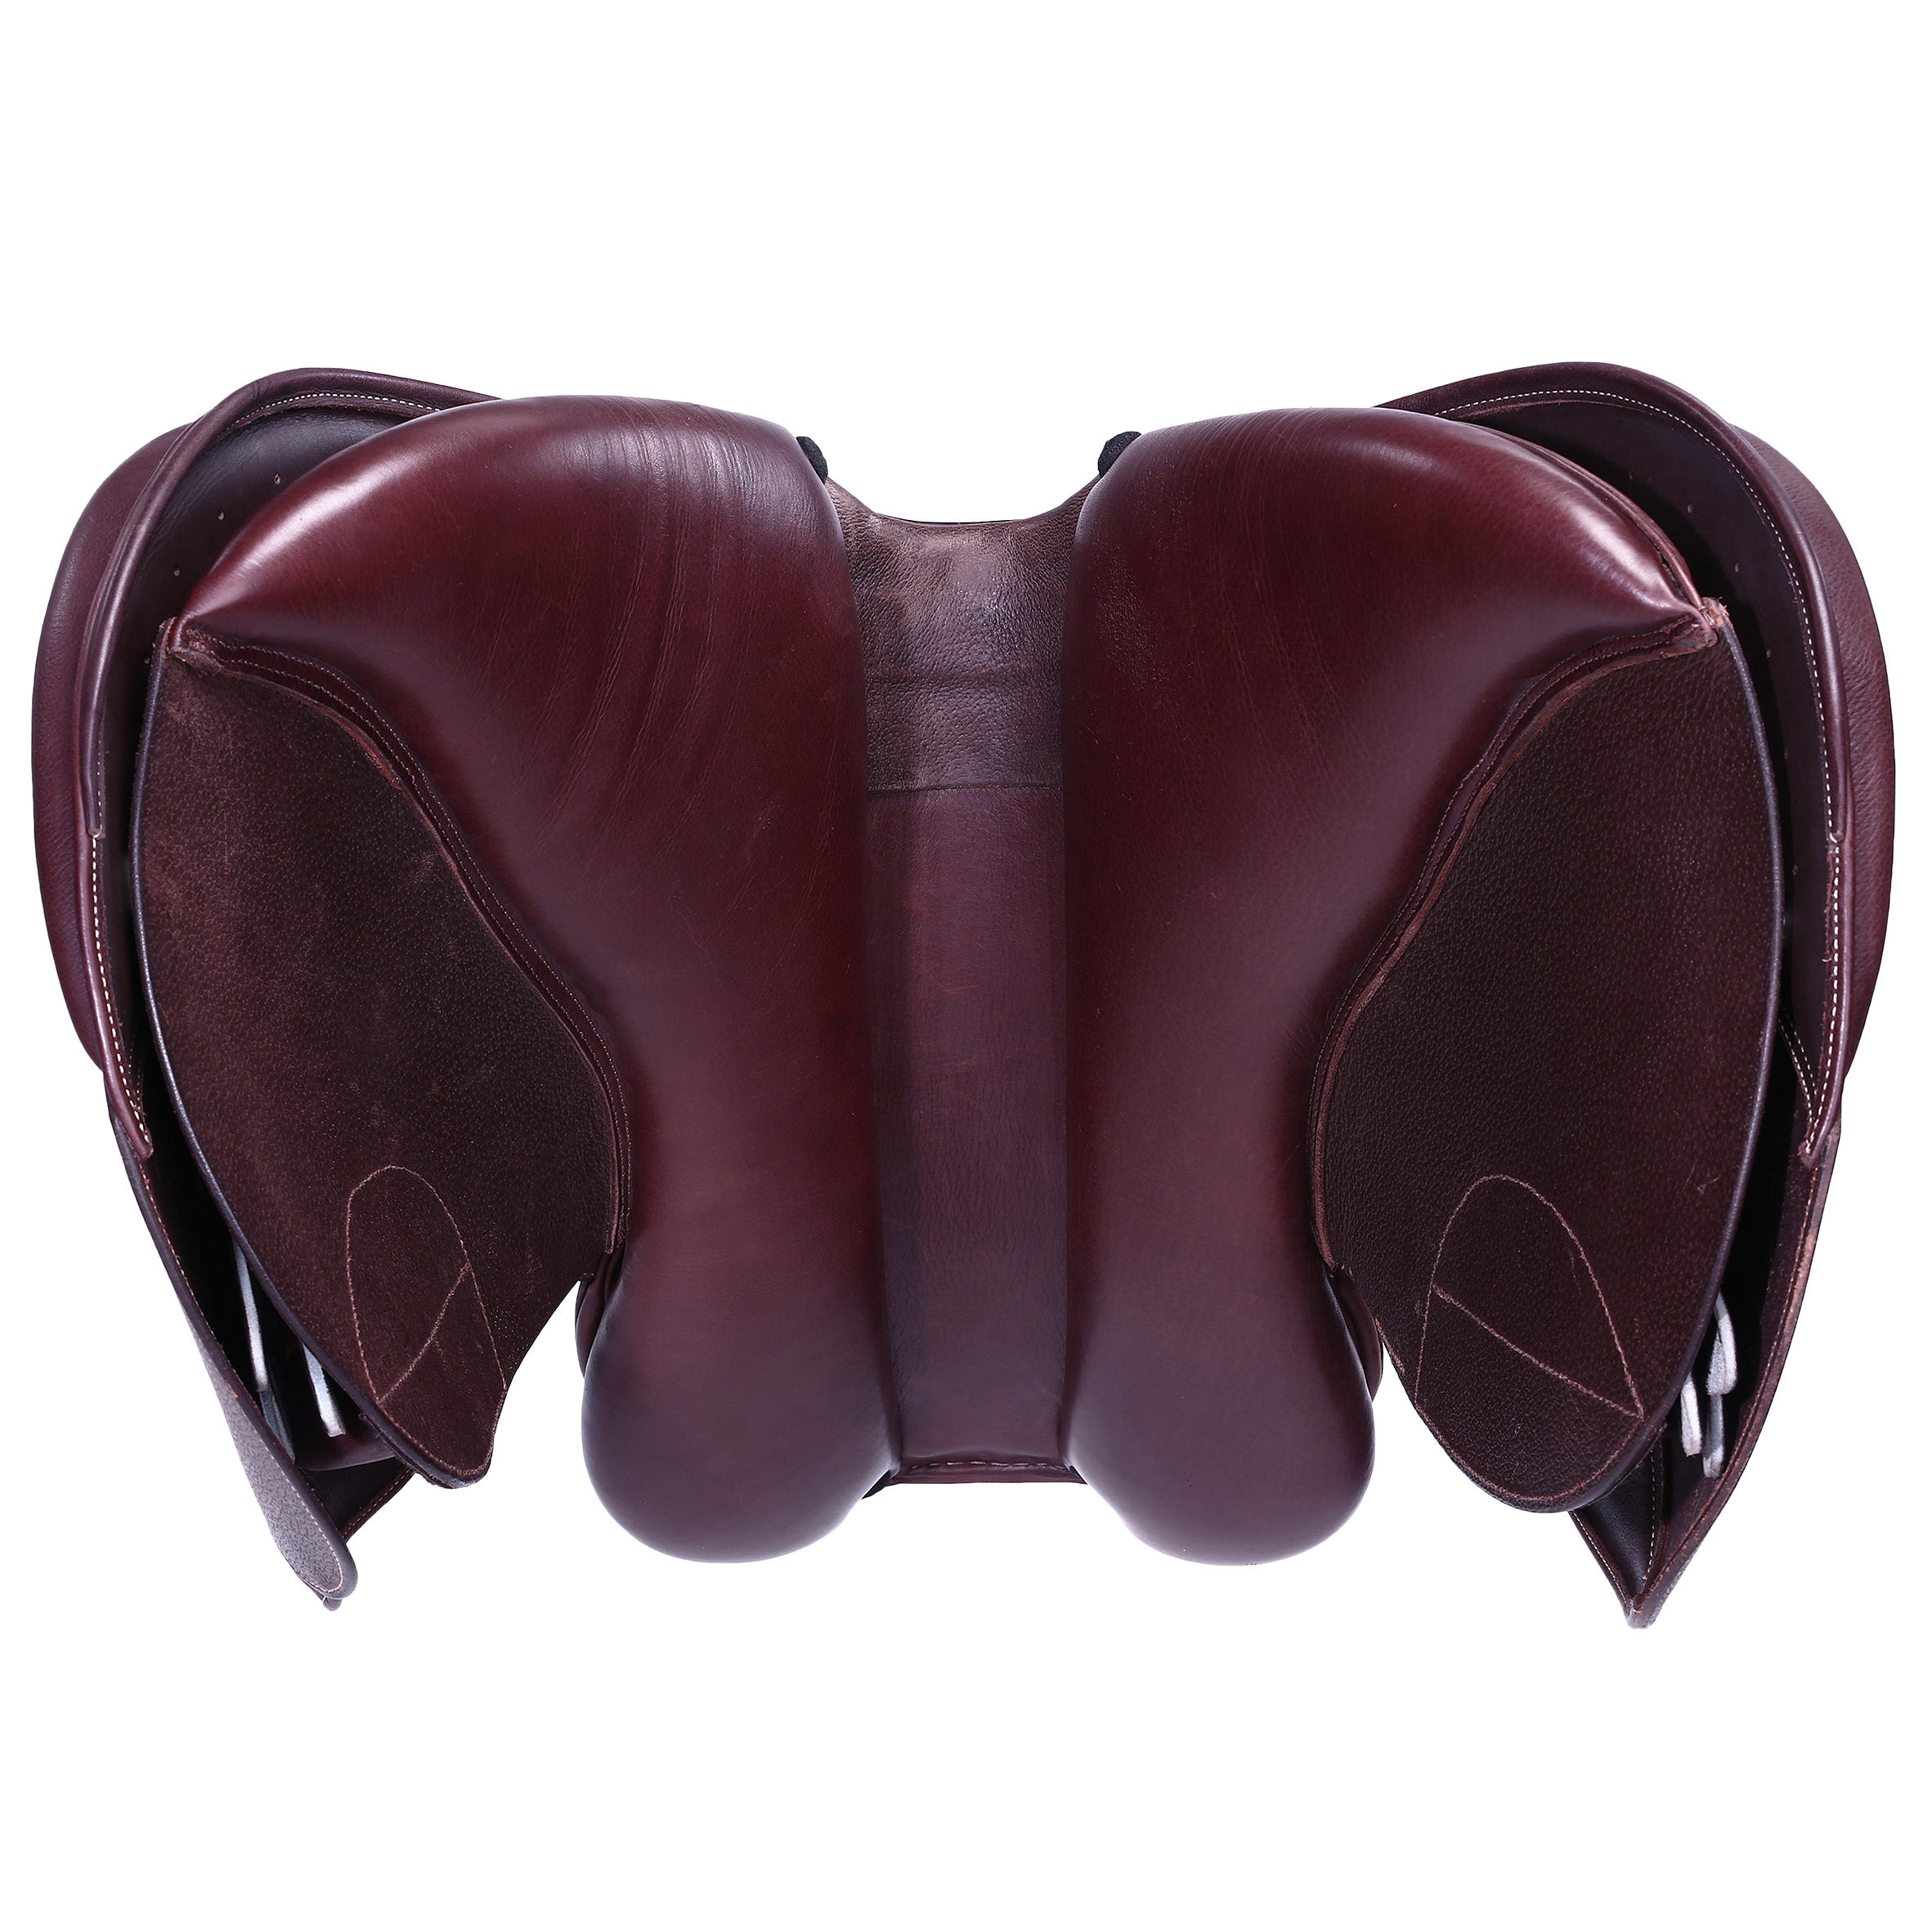 17.5" Versatile Leather Horse Riding Saddle for Horse - Brown 5/15